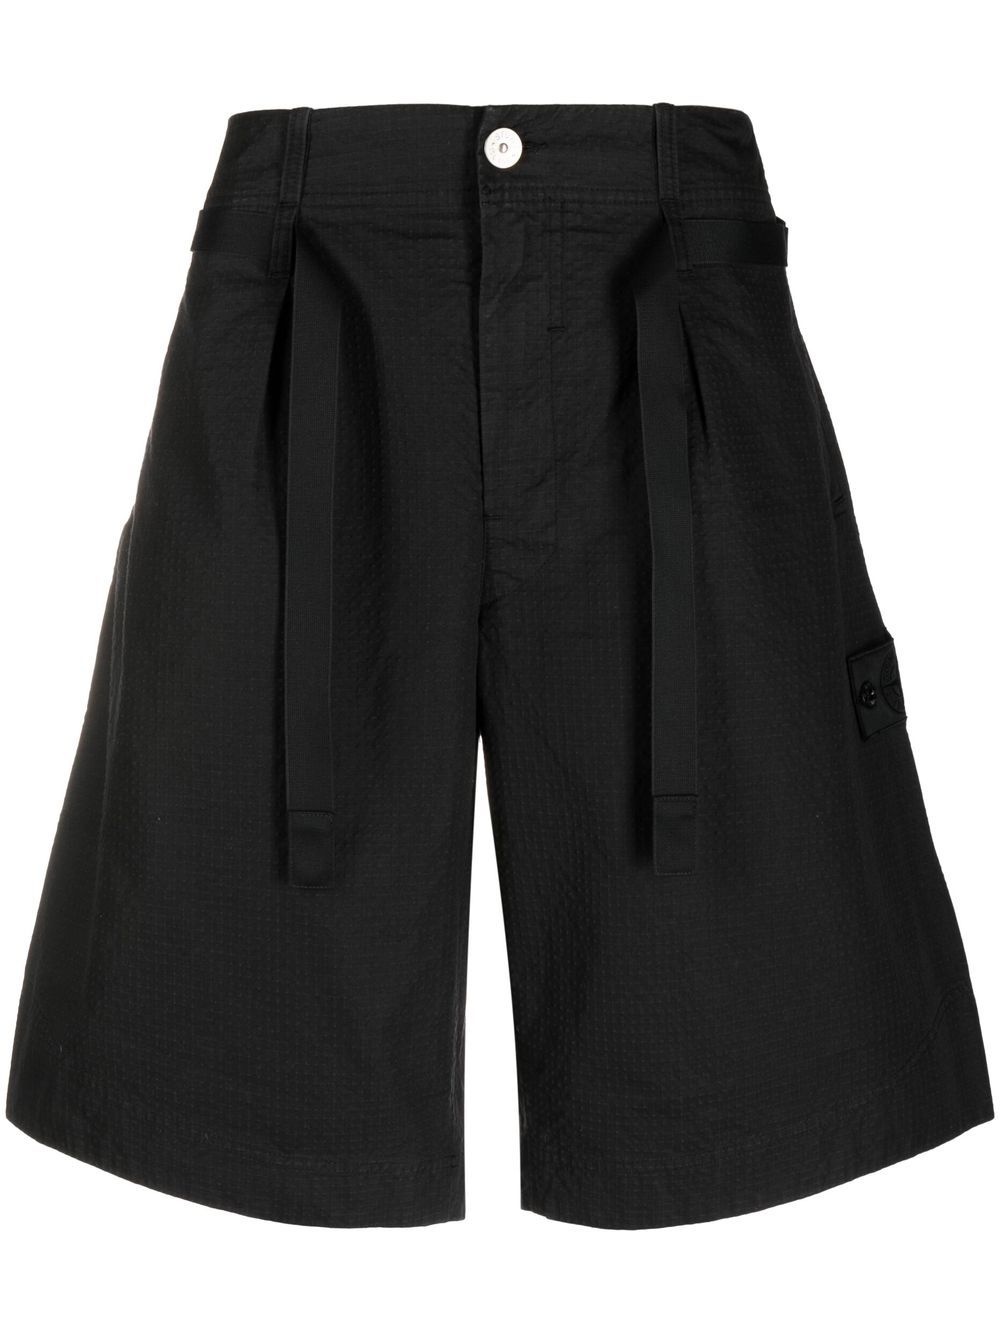 Compass-patch chino shorts